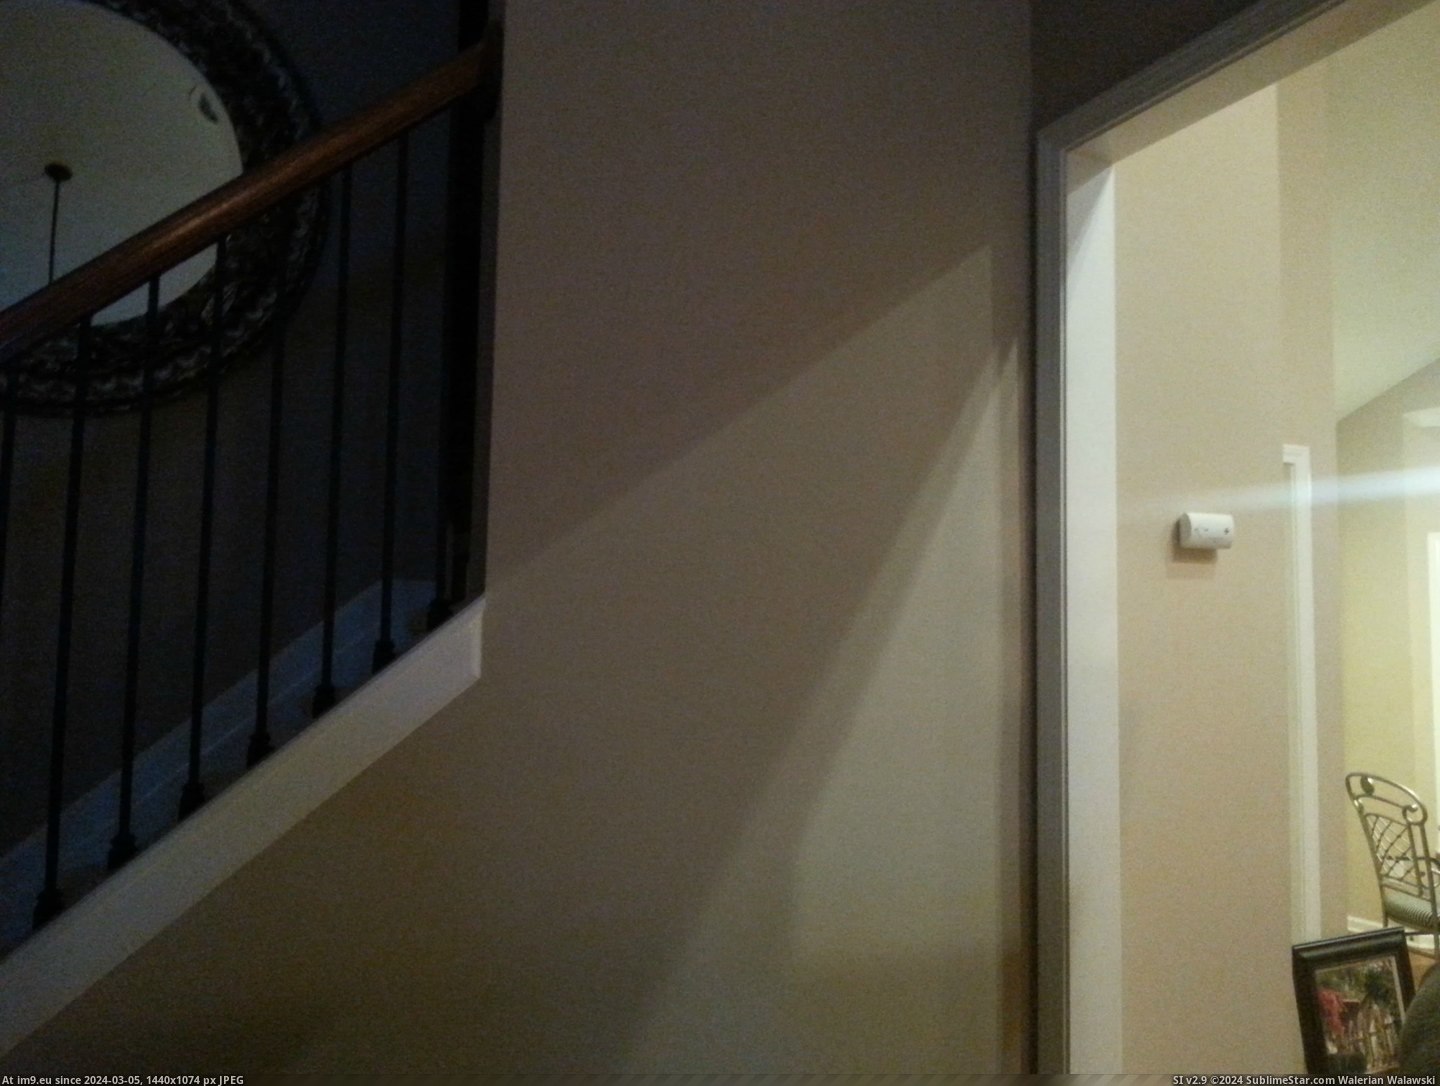 #Lines #Light #Baseboard #Stairs #Doorway [Mildlyinteresting] The light from the doorway lines up with the baseboard of the stairs Pic. (Obraz z album My r/MILDLYINTERESTING favs))